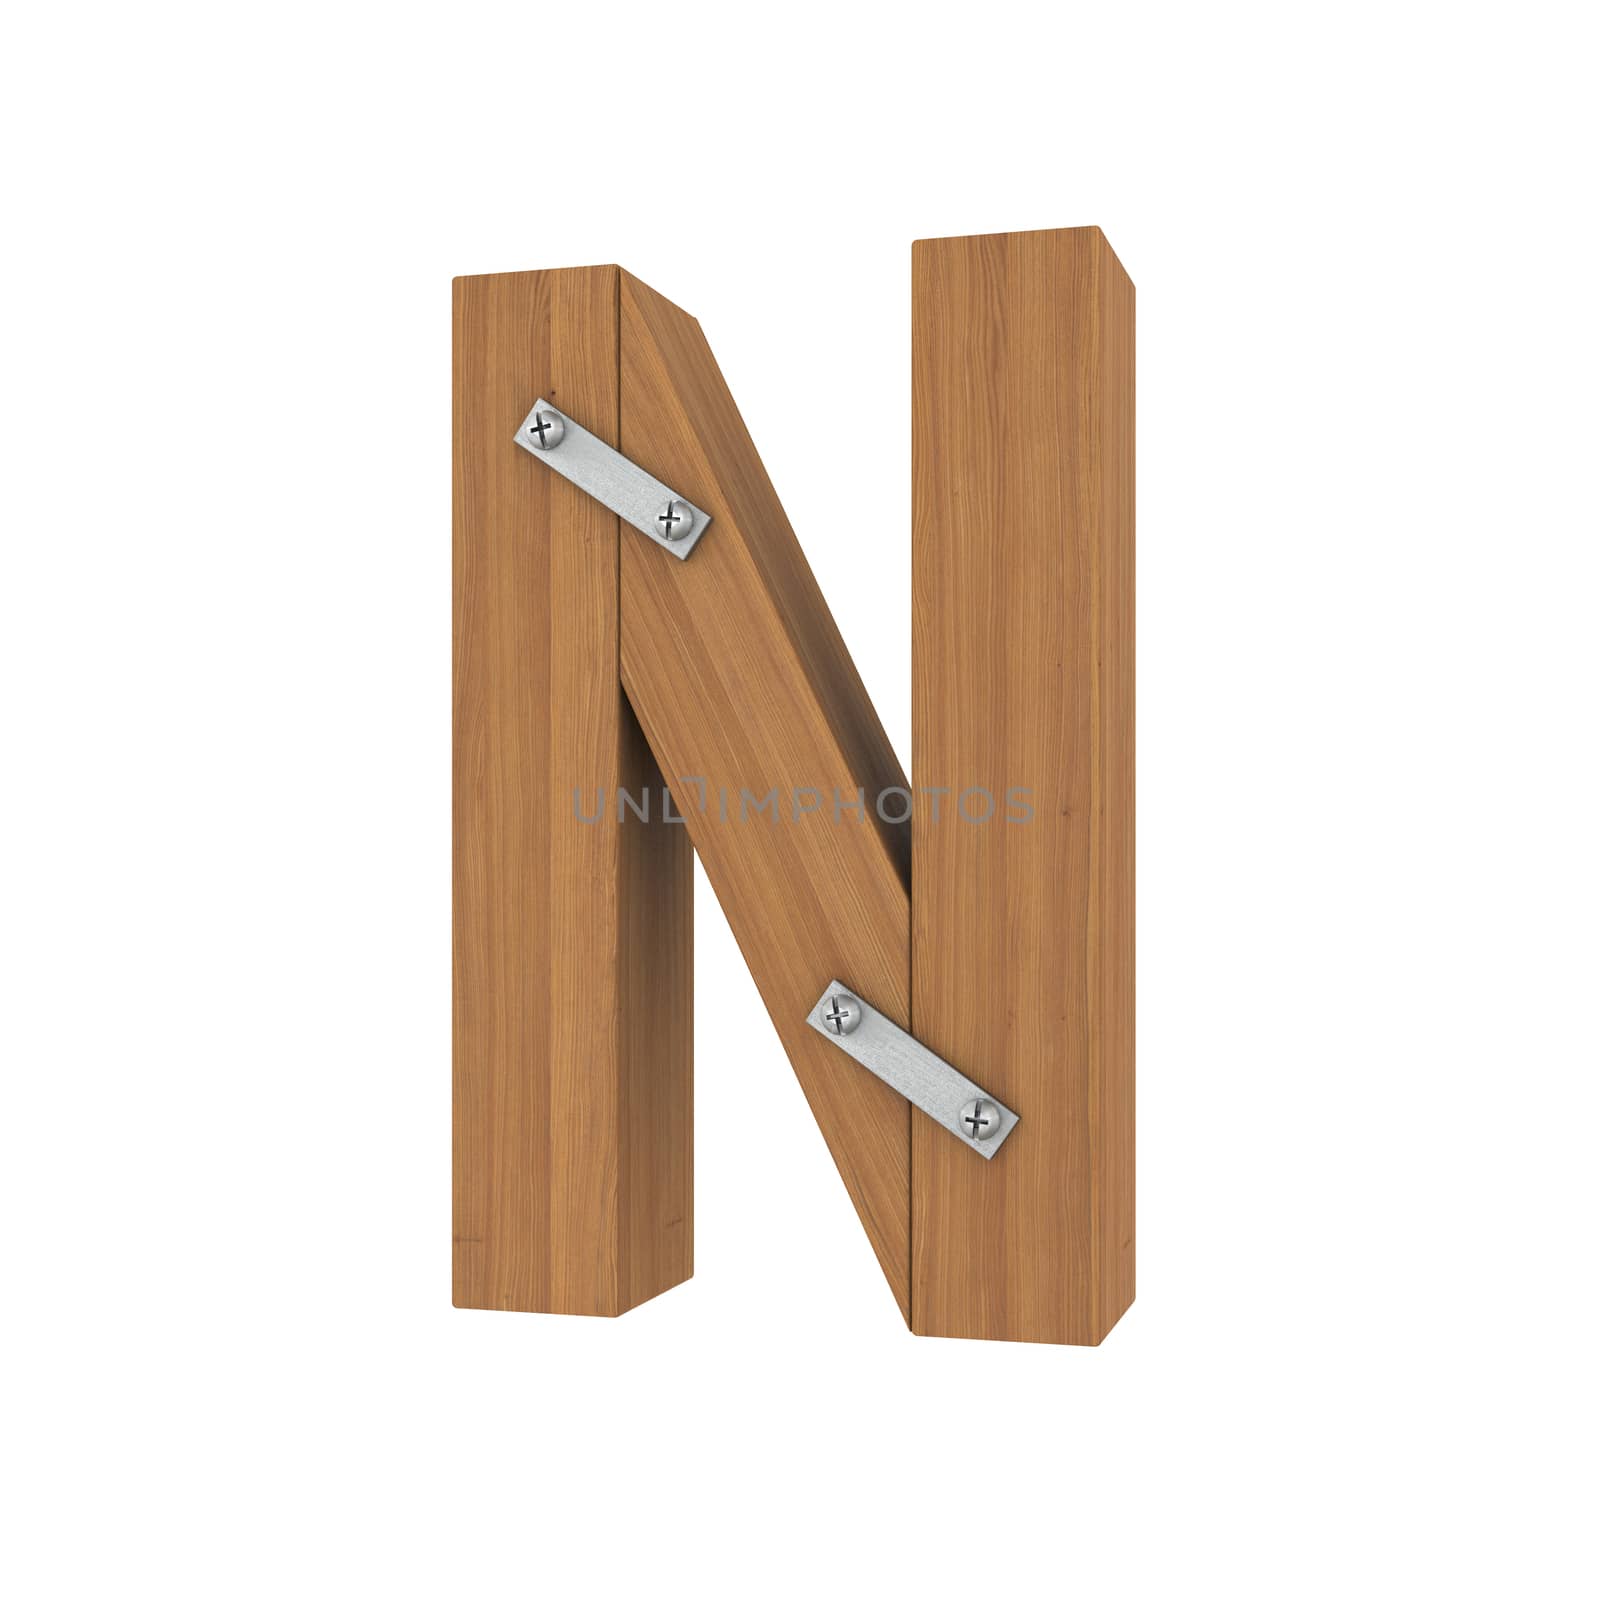 Wooden letter N by cherezoff